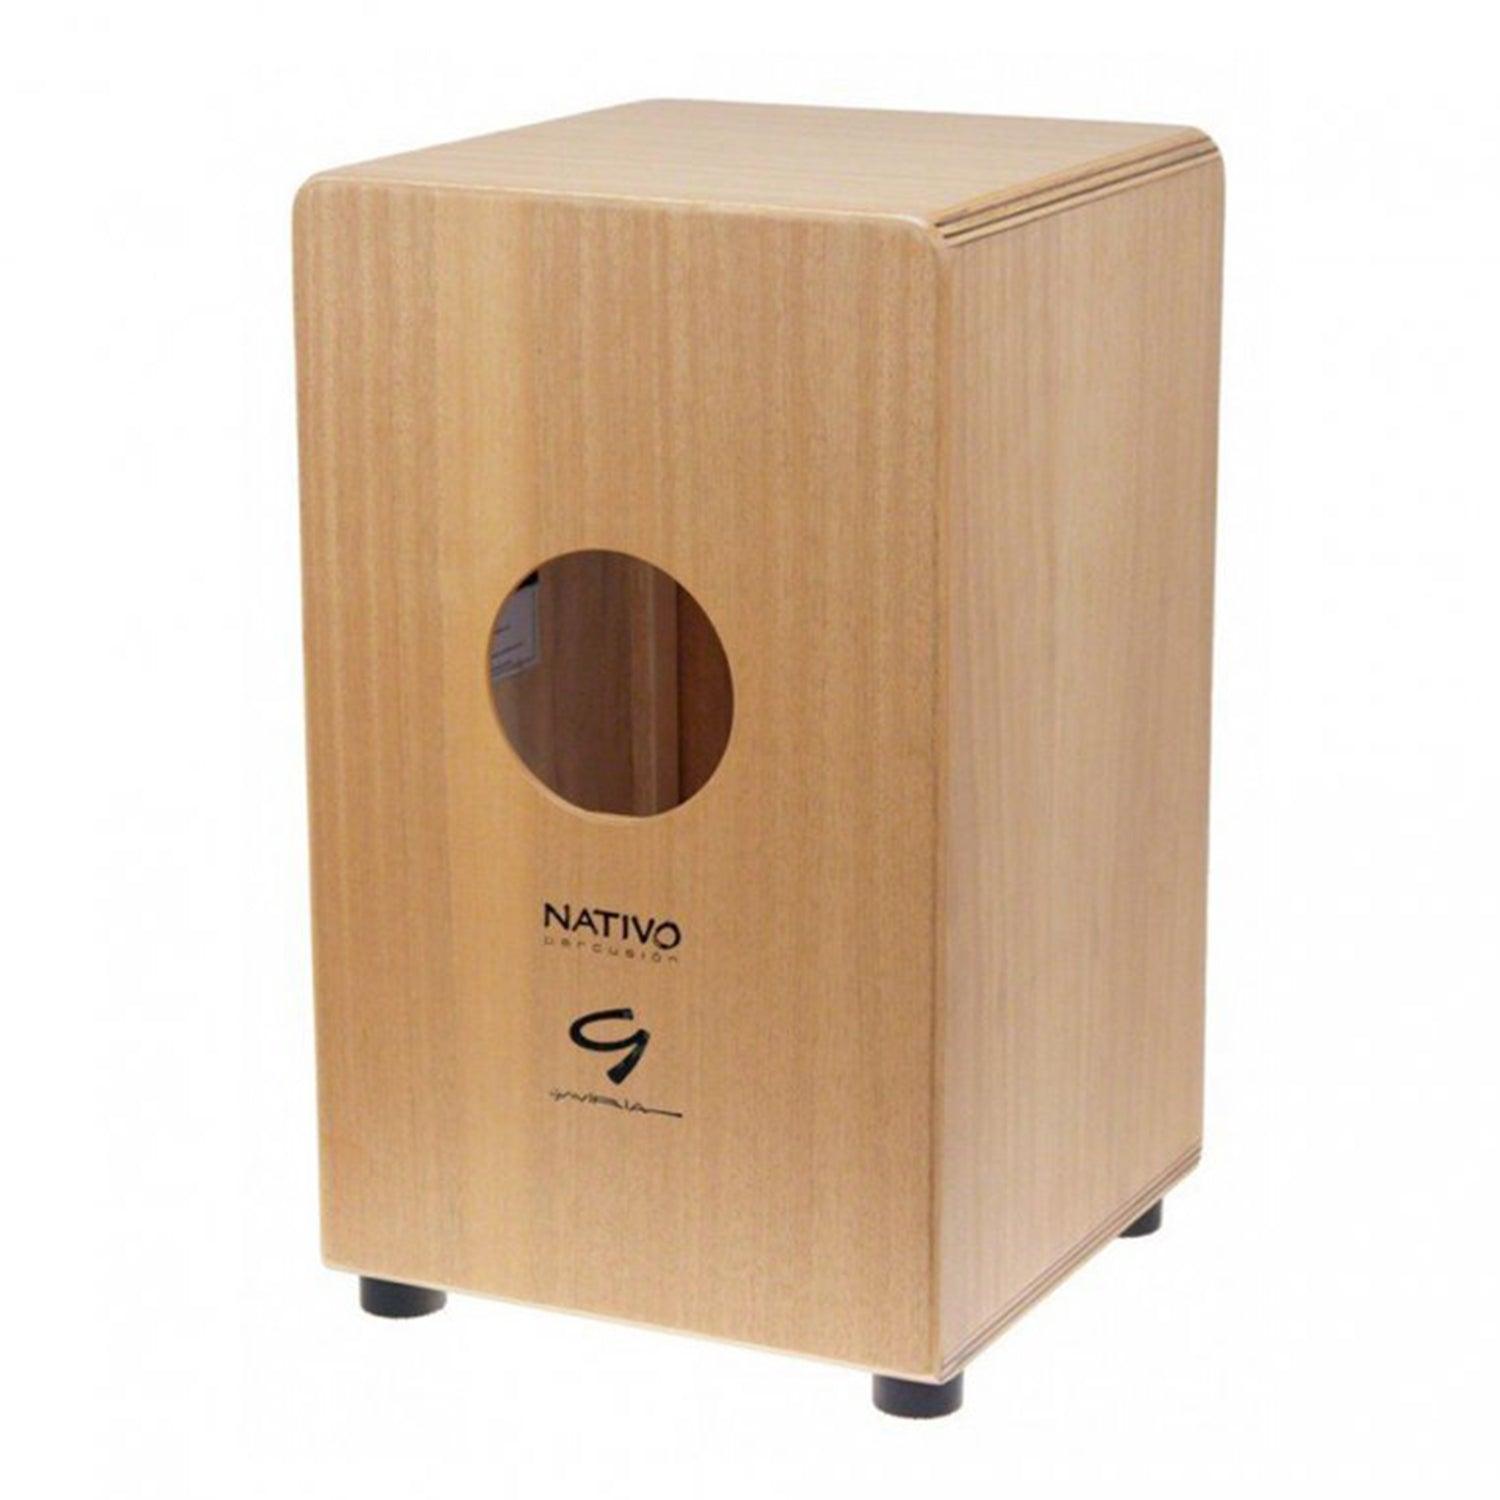 Nativo INIC-NATURAL Inicia Series Standard-Sized Class A Oak Cajon with Natural style Front Board Finish - DY Pro Audio